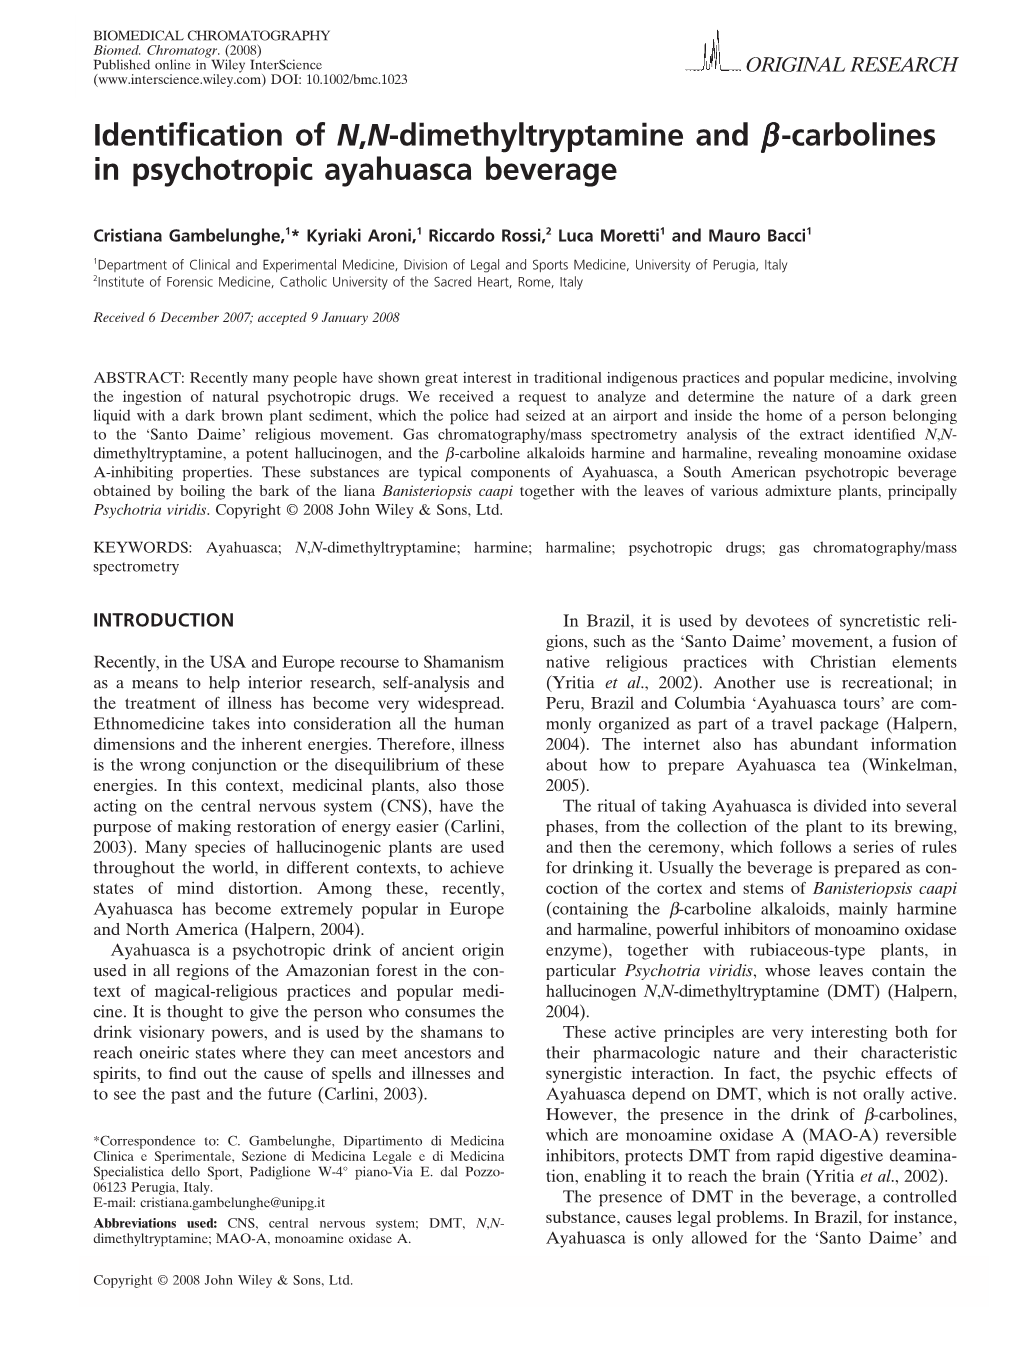 Carbolines in Psychotropic Ayahuasca Beverage